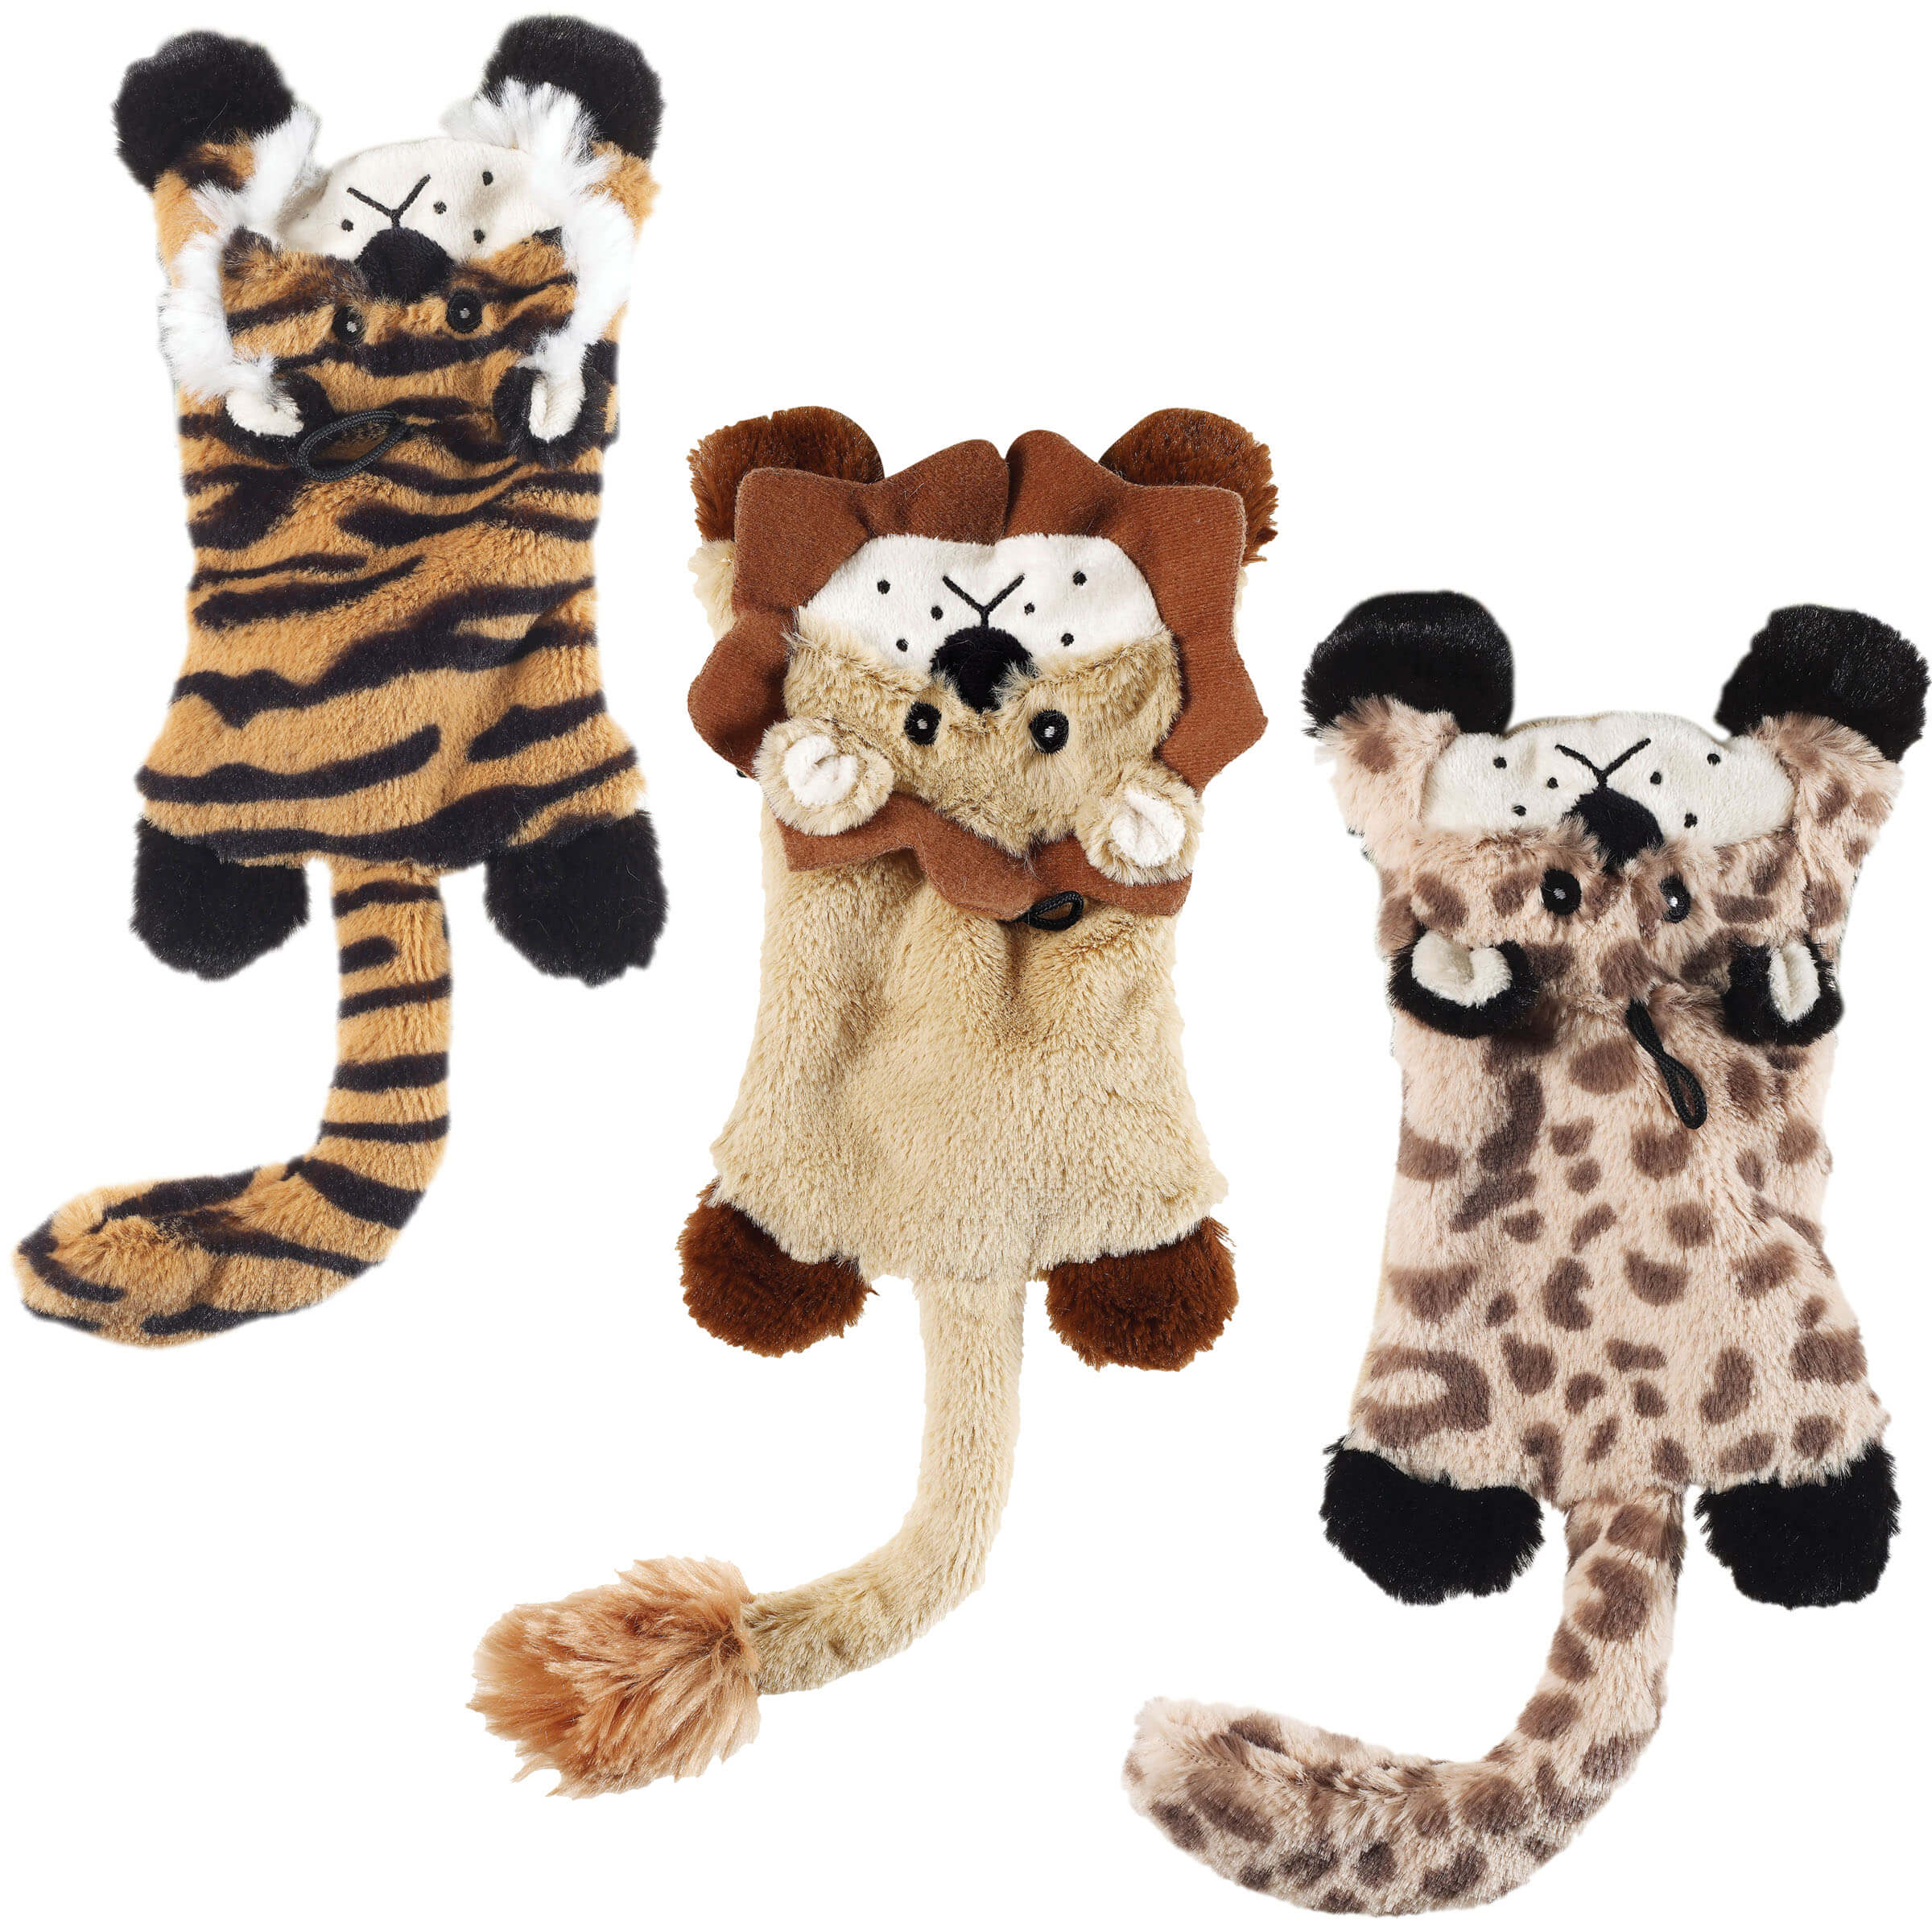 Stuffing-free flat cats in assorted patterns (tiger, lion, leopard)